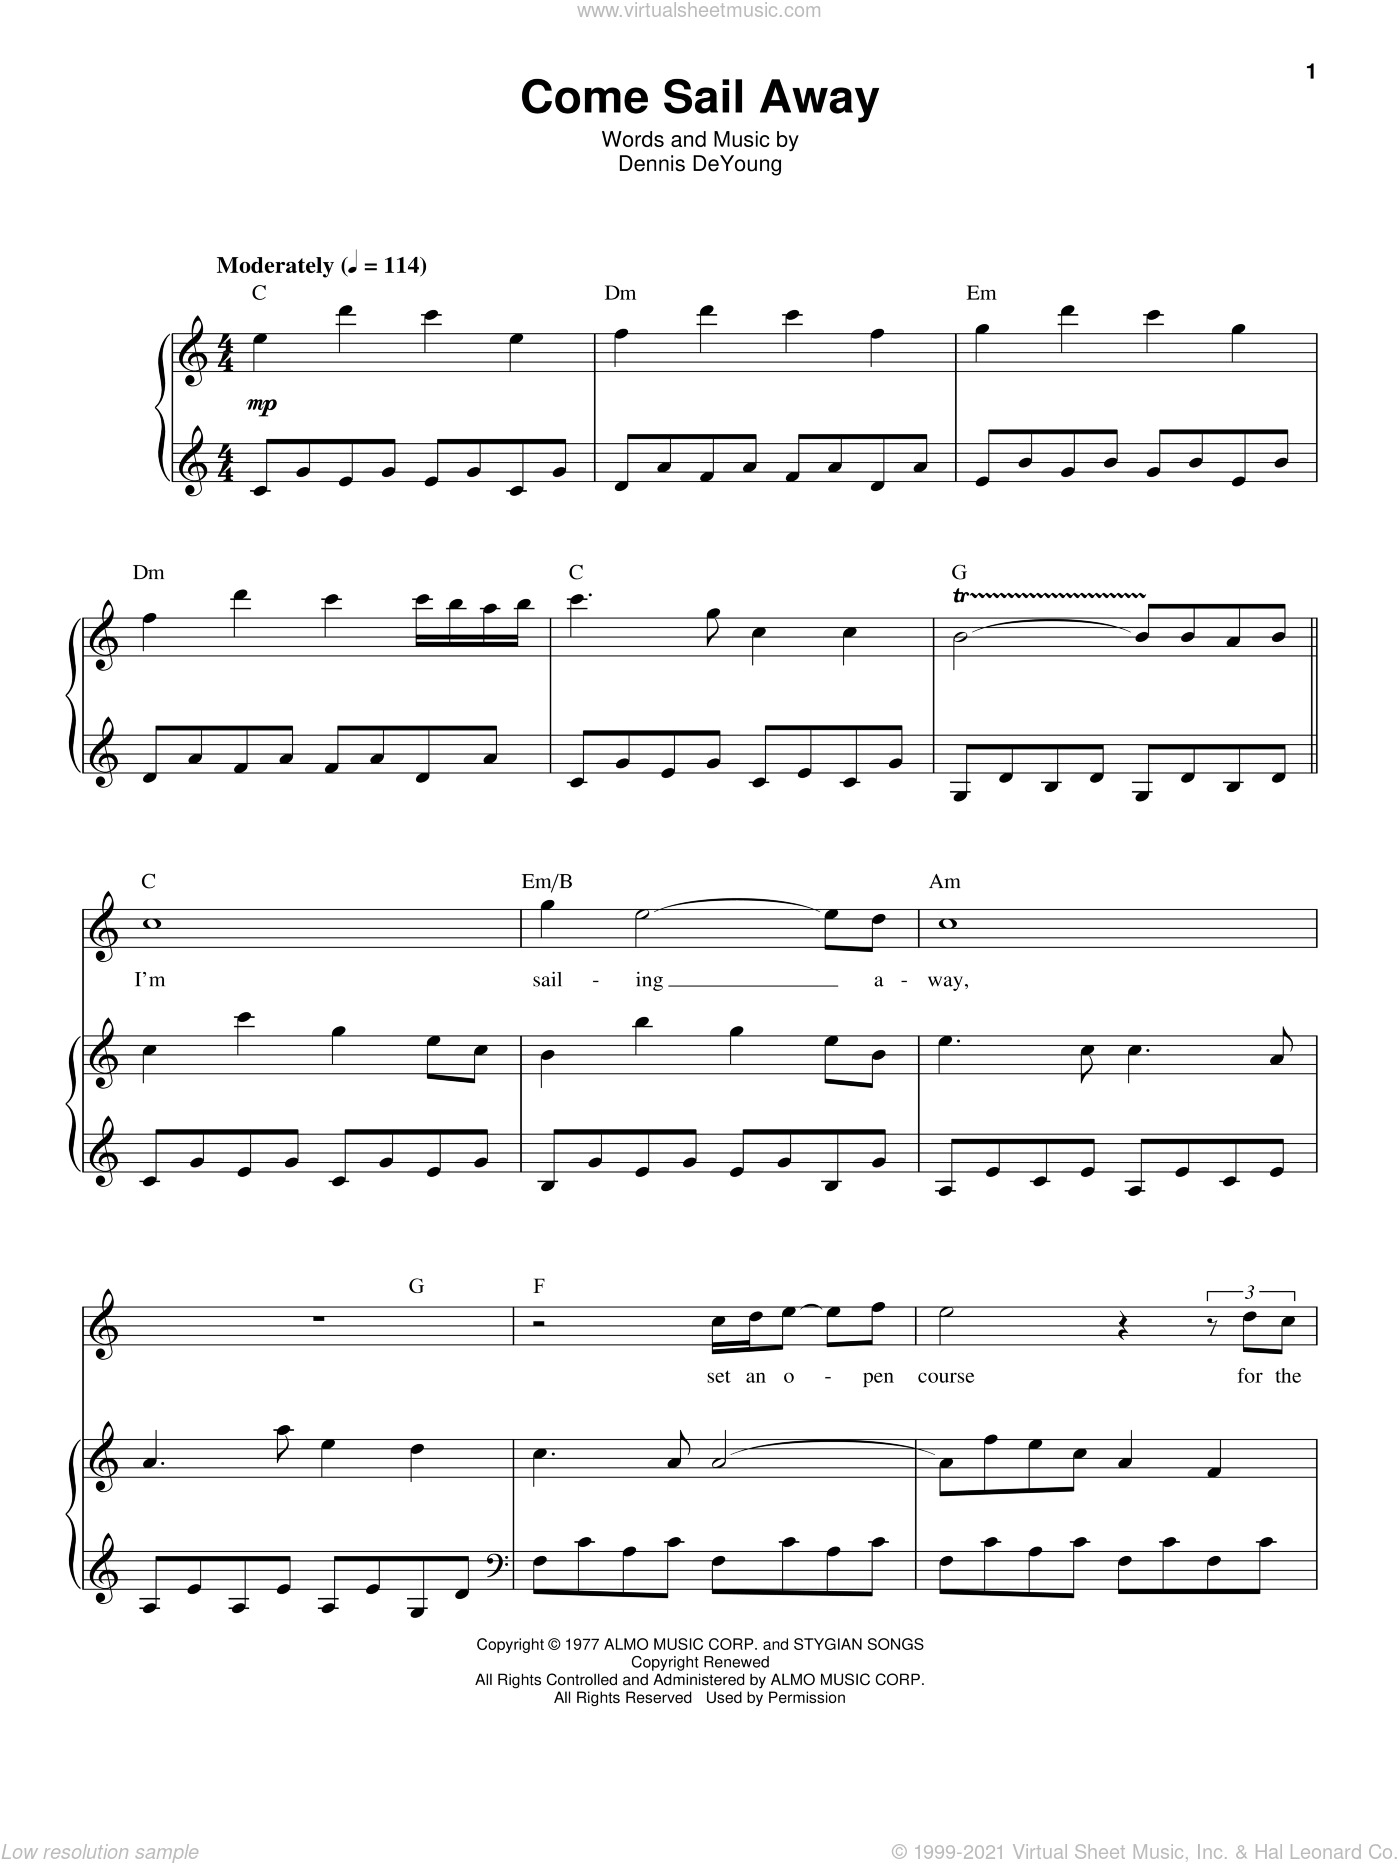 Styx - Come Sail Away sheet music for voice and piano (PDF)